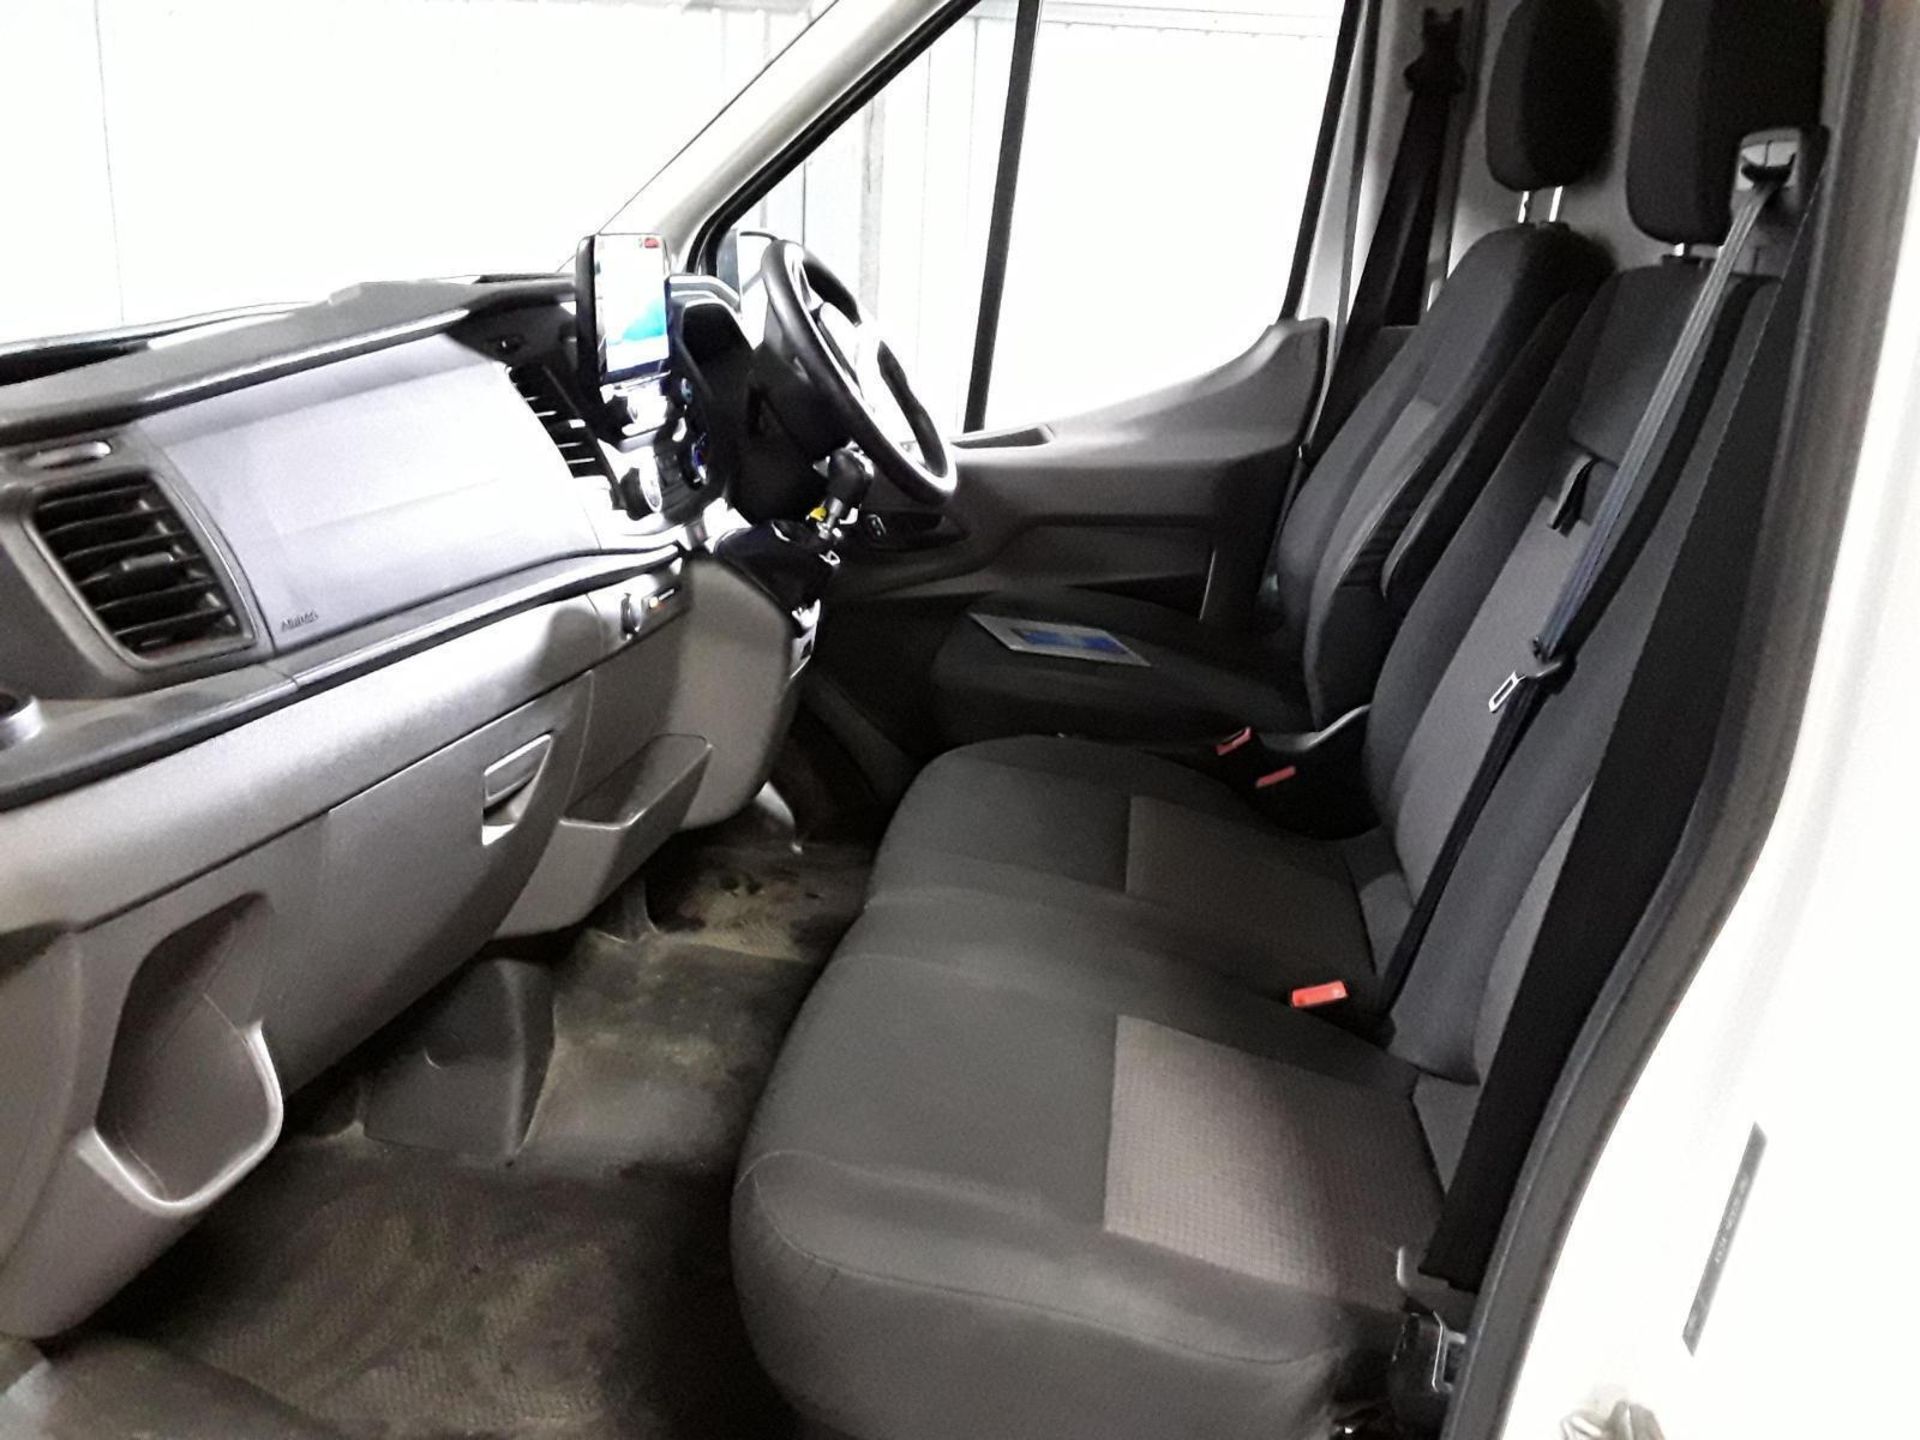 2020 FORD TRANSIT LWB L3H2 LEADER - RELIABLE AND WELL-EQUIPPED - Image 12 of 12